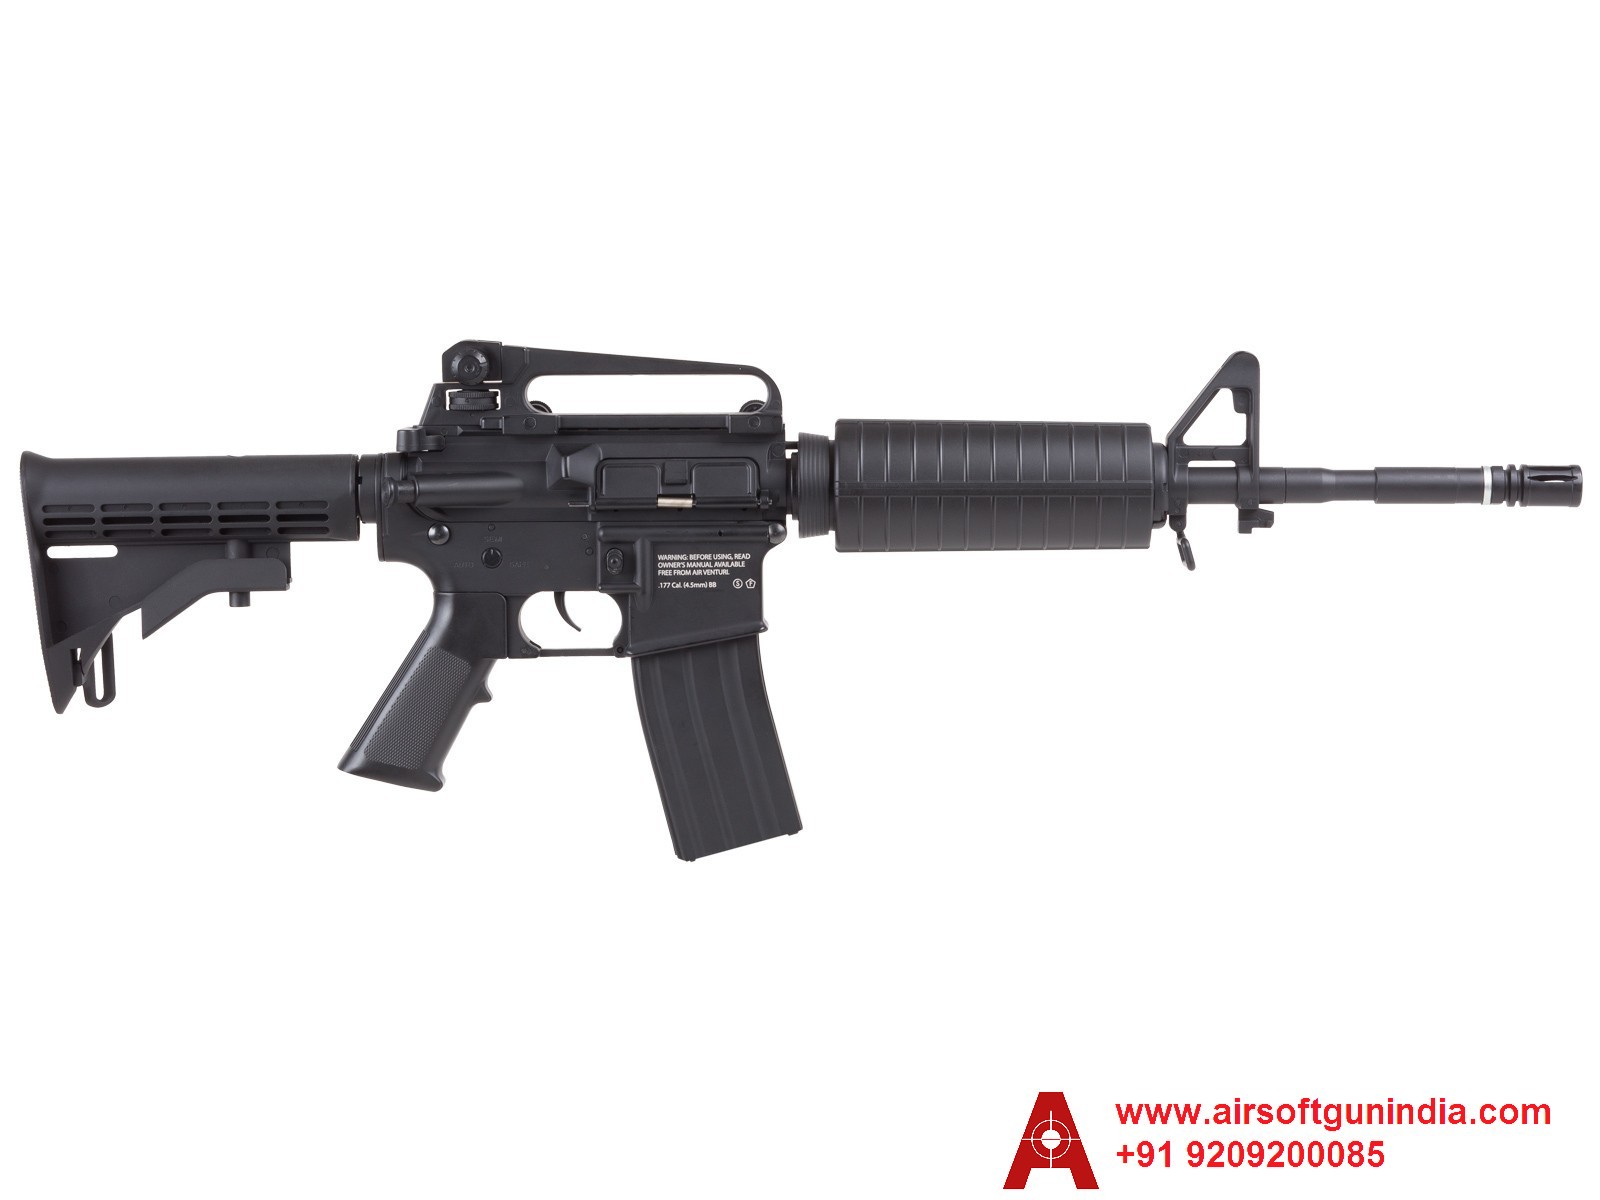 HellBoy M4  .177 CO2 BB Tactical Air Rifle, Black In India By Airsoft Gun India